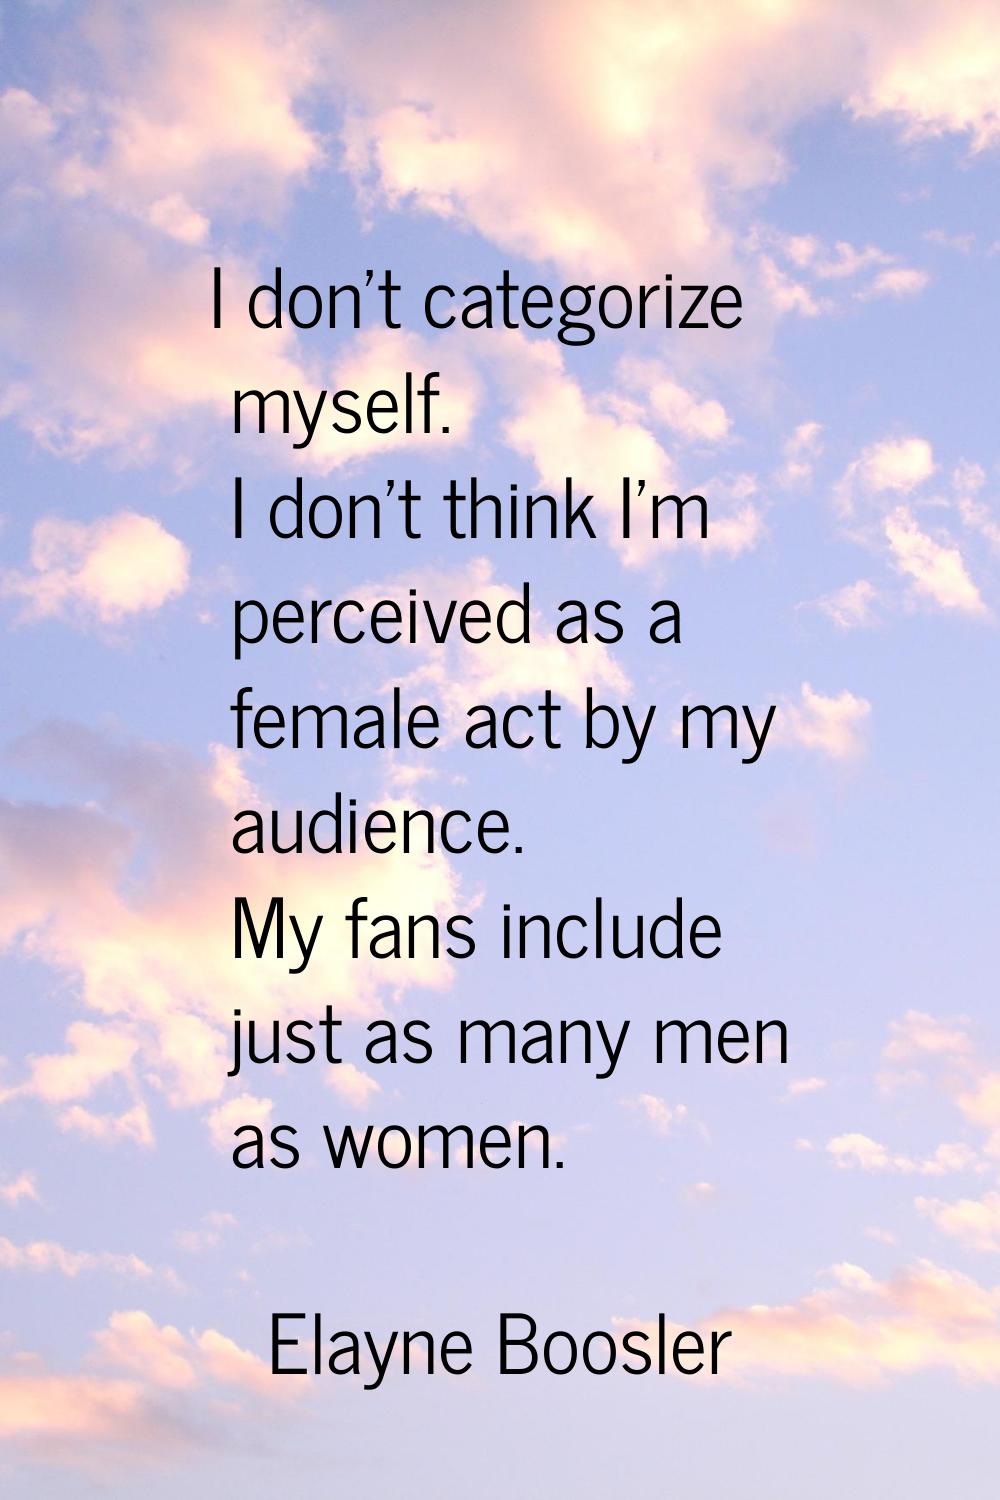 I don't categorize myself. I don't think I'm perceived as a female act by my audience. My fans incl